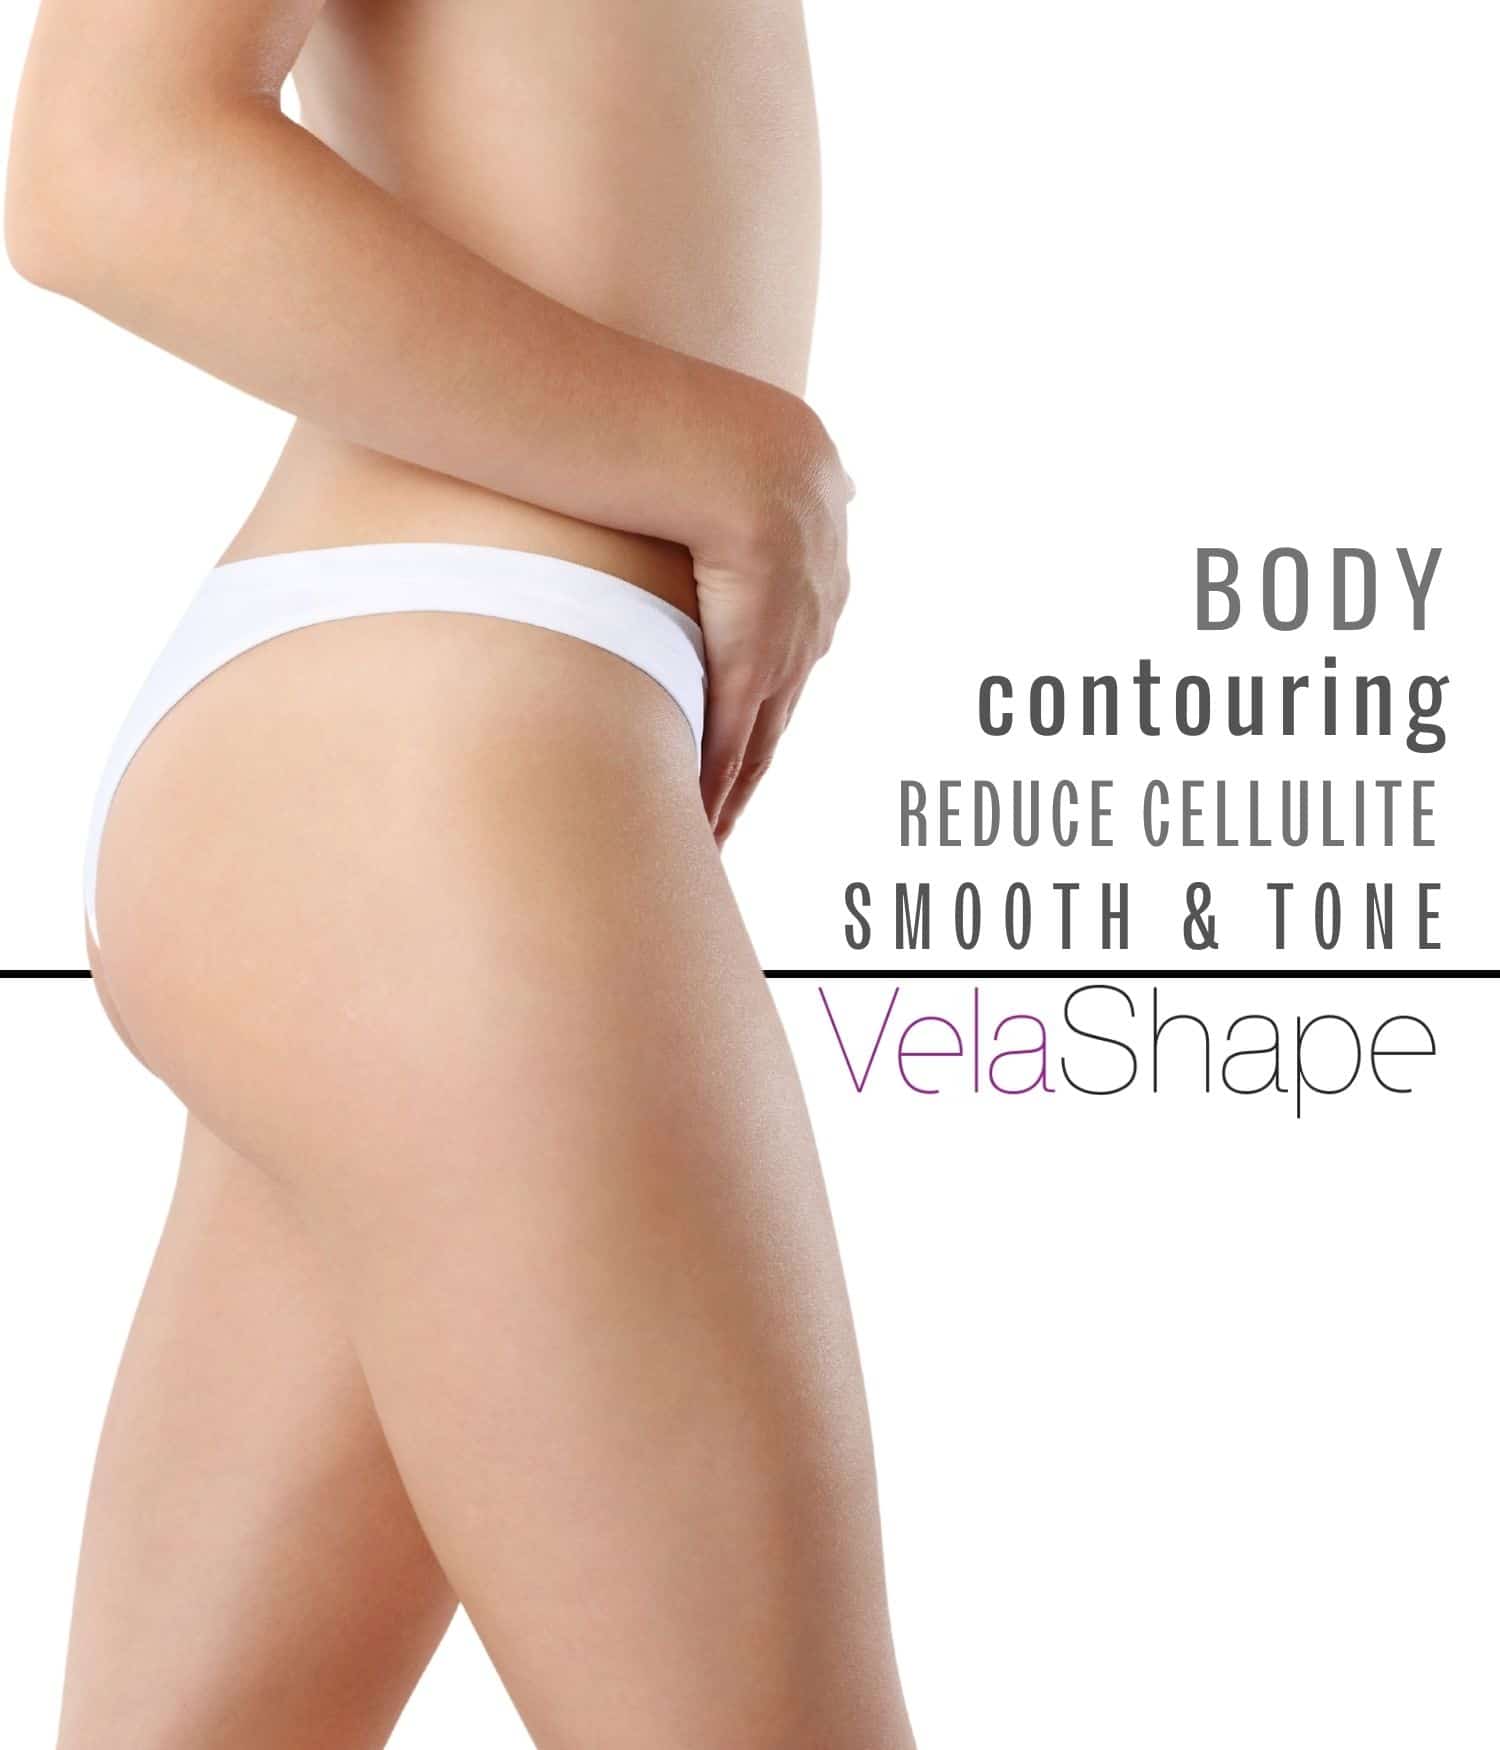 Woman standing to the side showing her contoured body and cellulite reduction after non-invasive after VelaShape treatment at Admire Aesthethics.